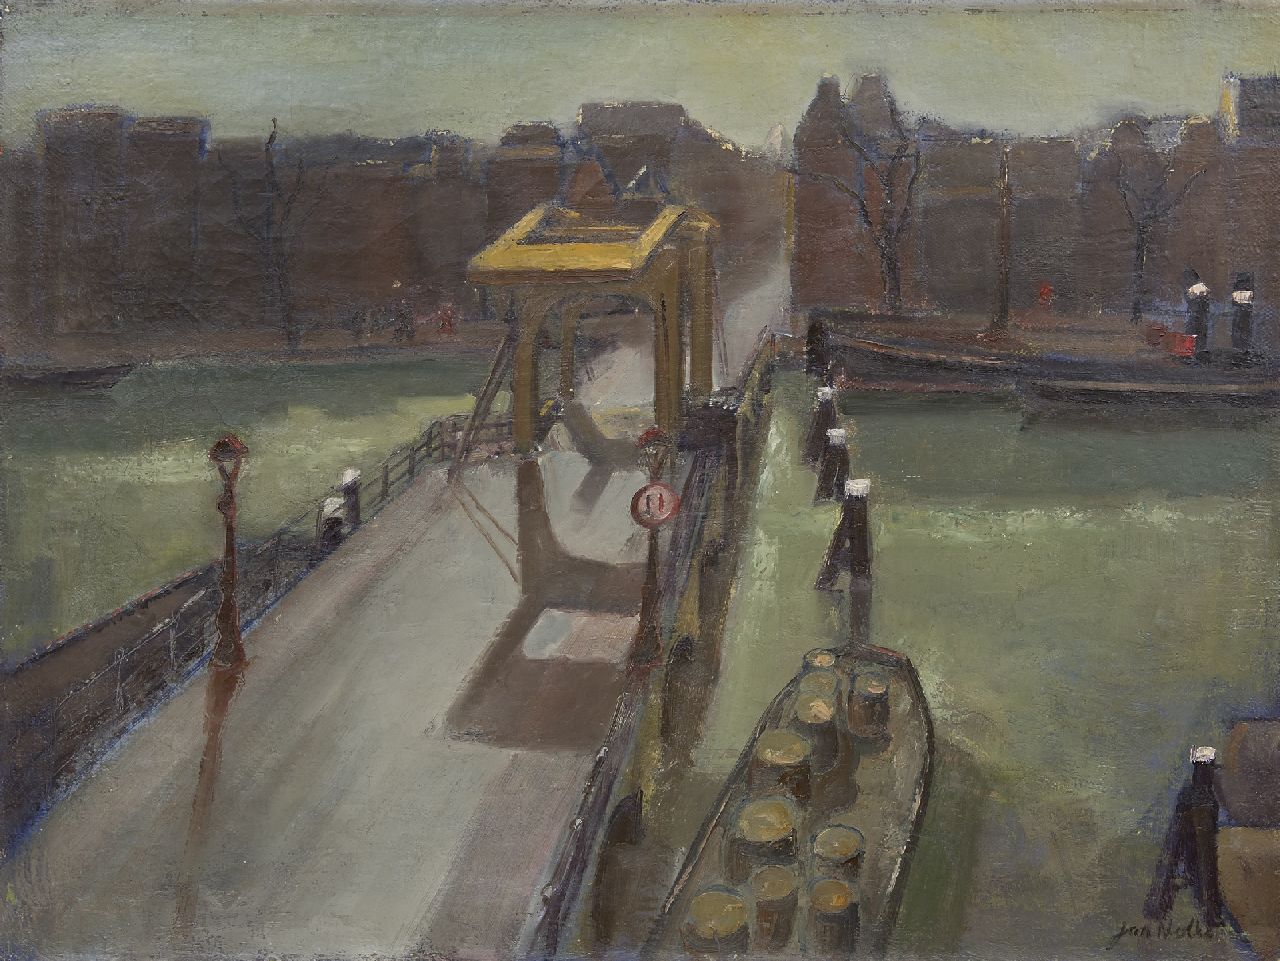 Jan Nolte | The Magere Brug, Amsterdam, oil on canvas, 60.5 x 80.3 cm, signed l.r. and verso